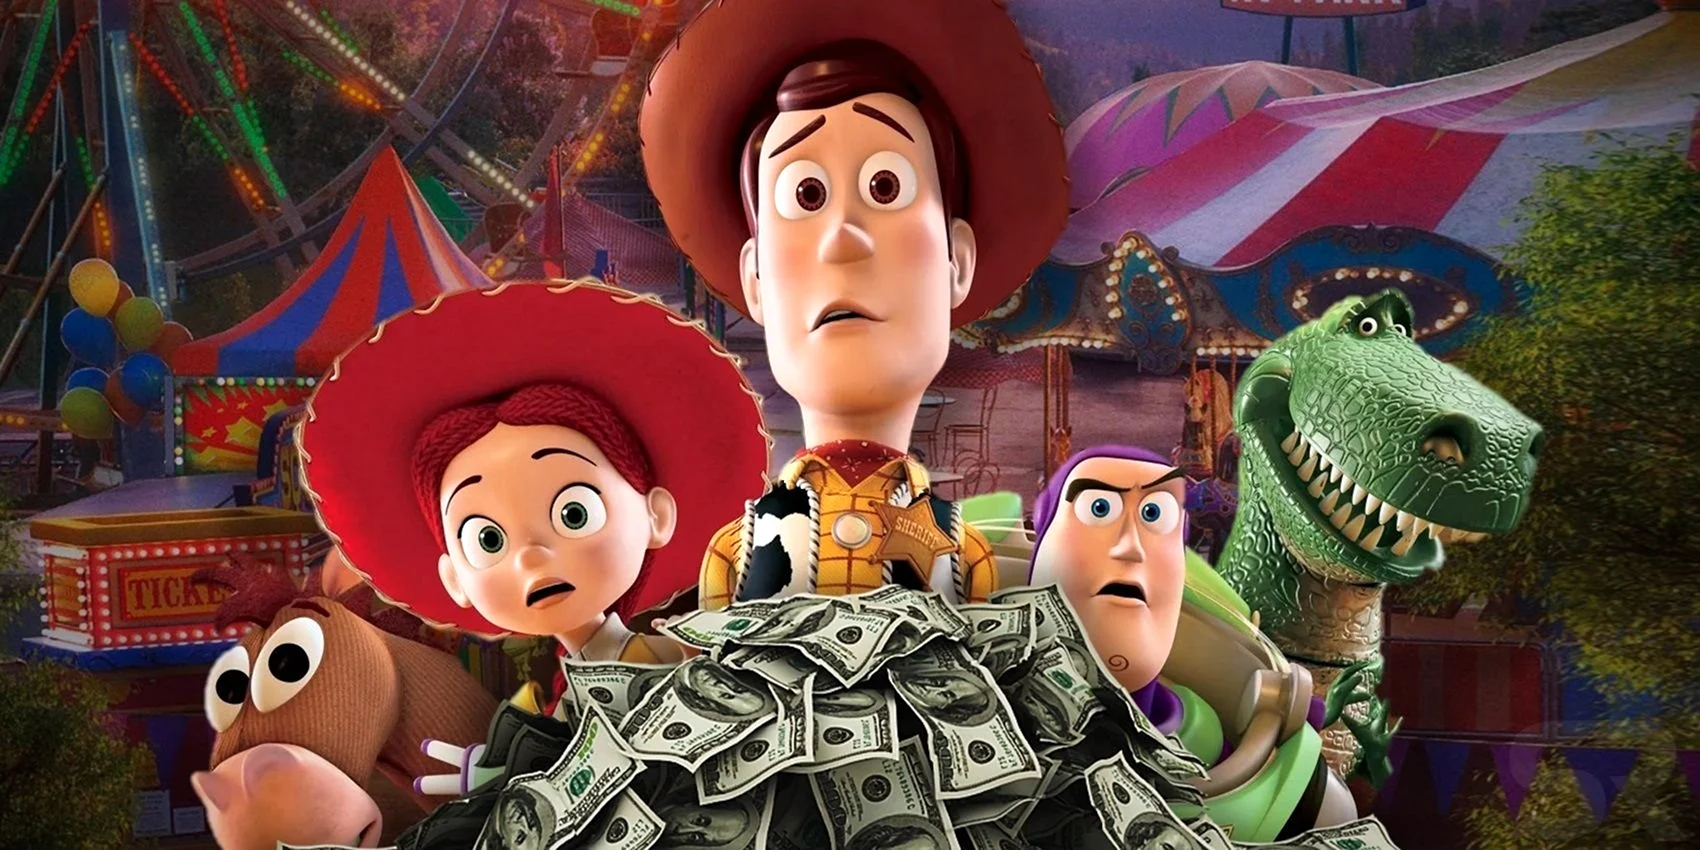 Toy story 3 2010